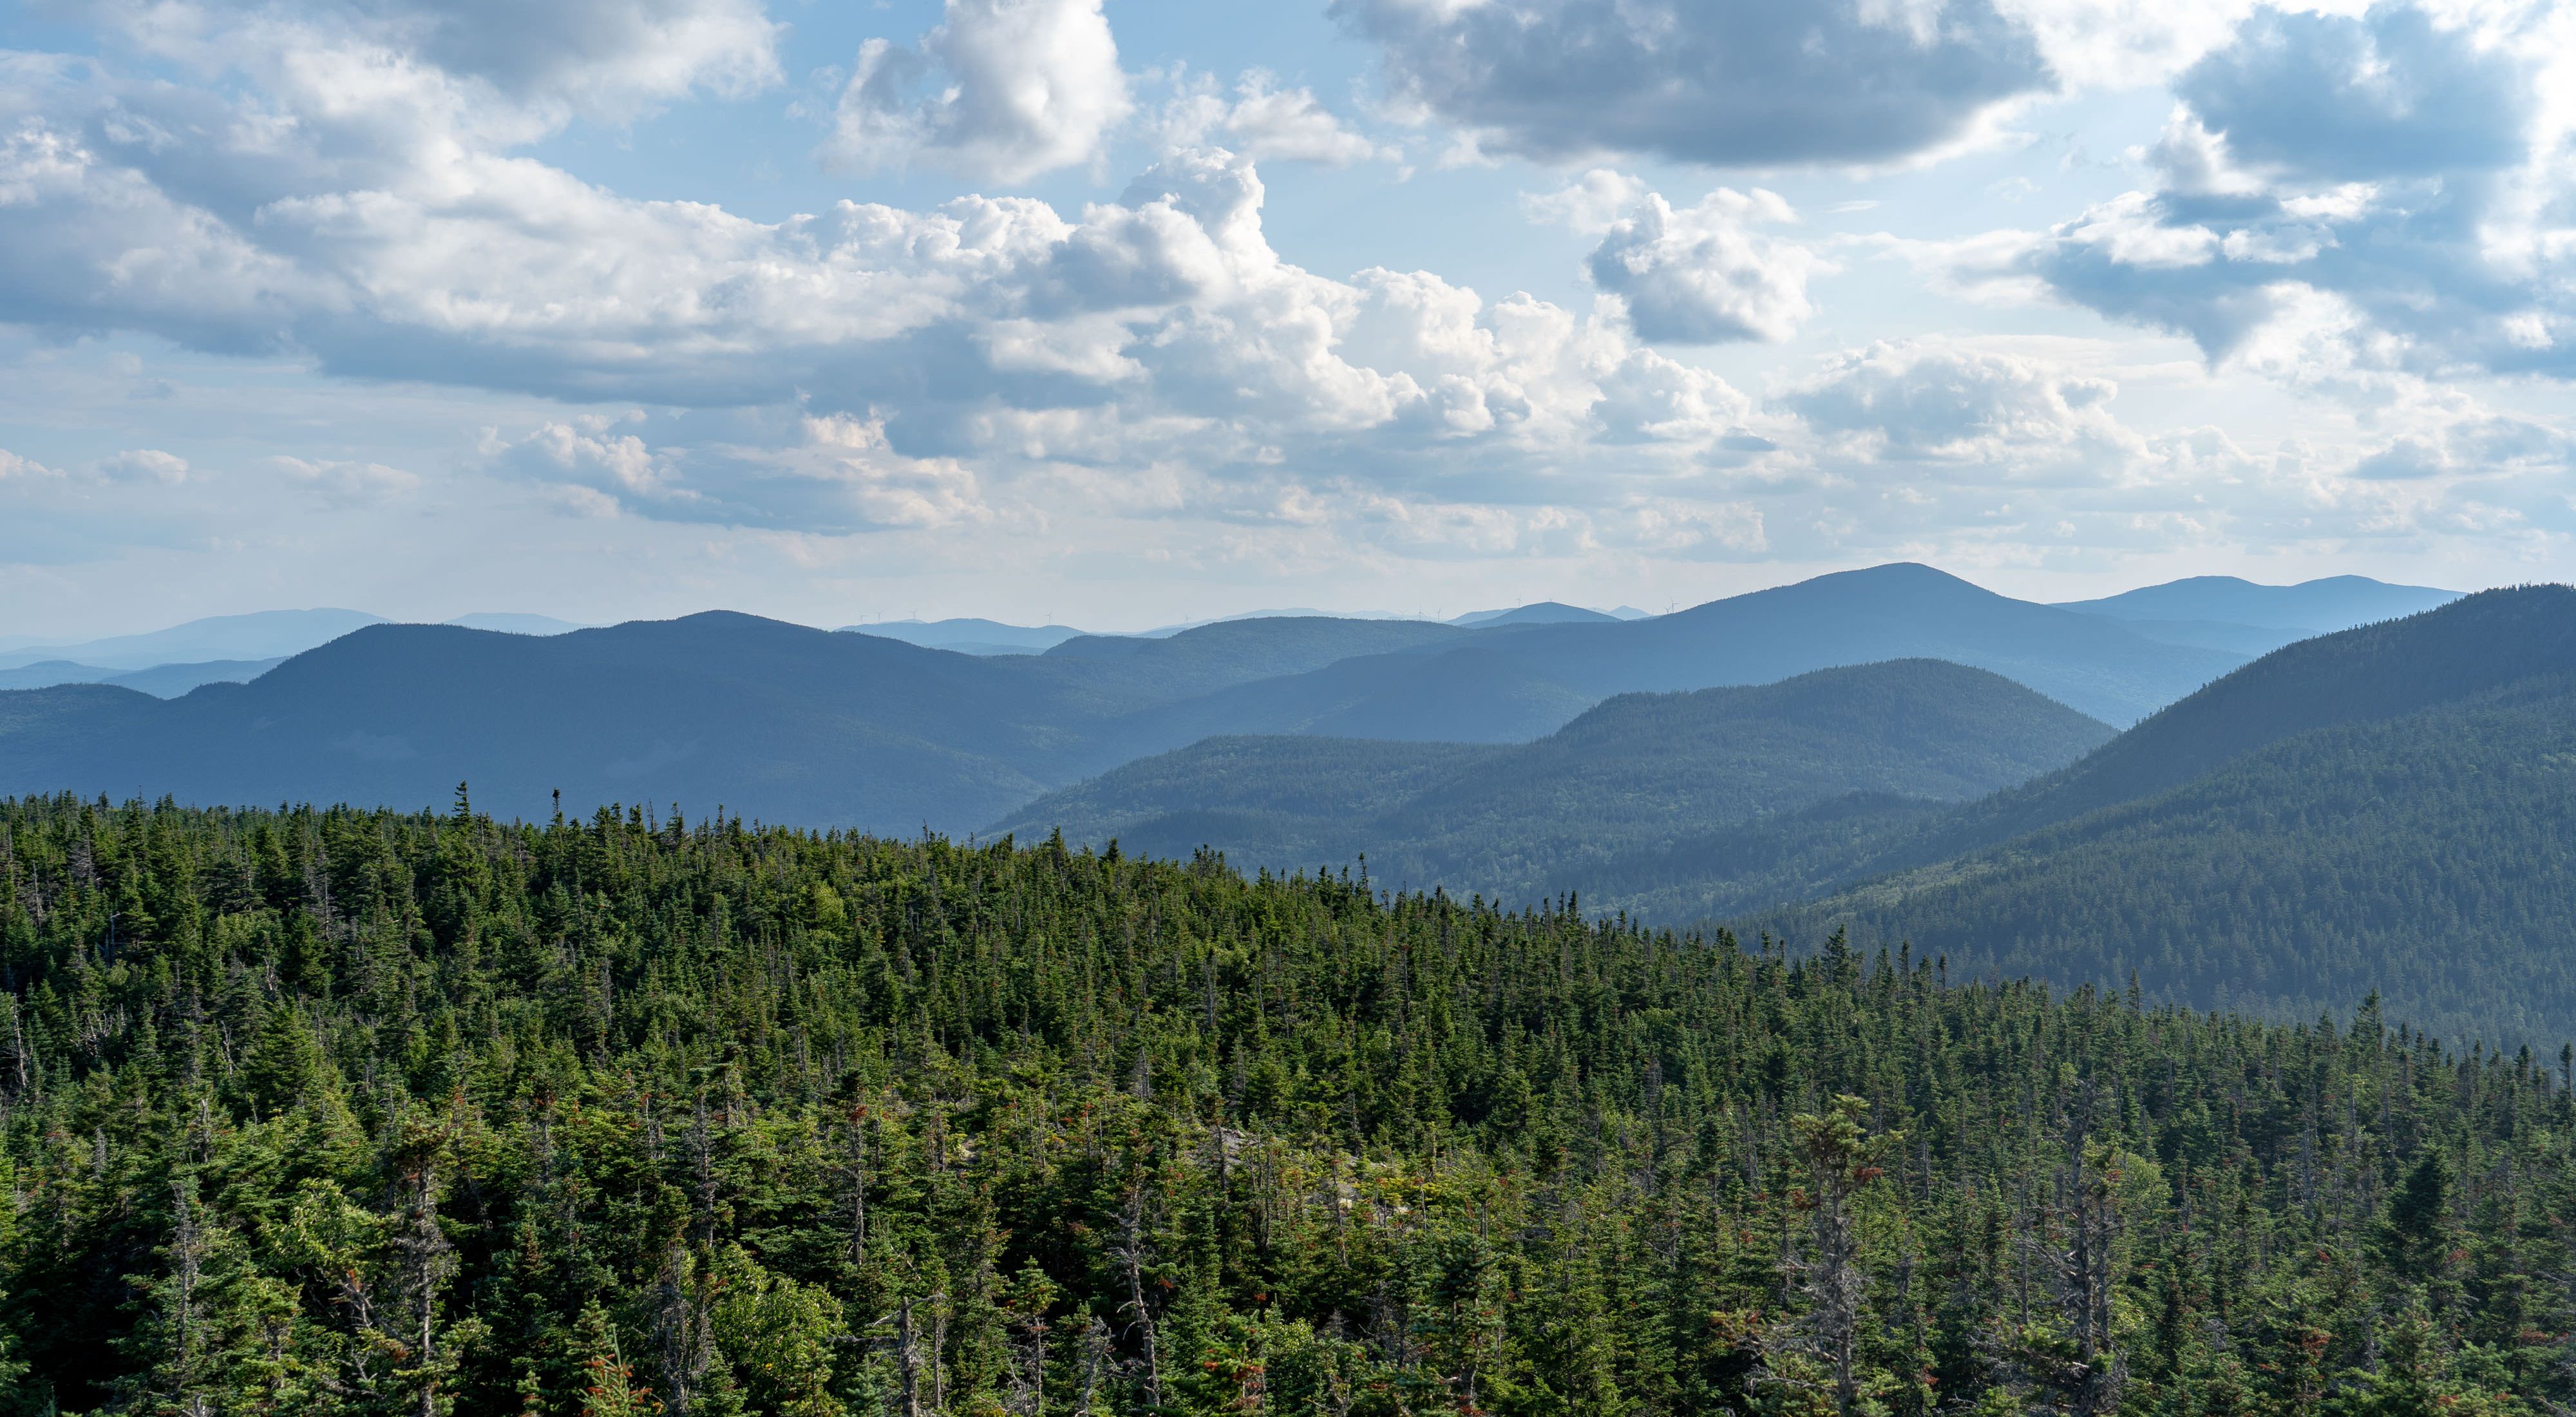 Photo of forests and hills from a mountaintop of northern Maine forests under a cloudy summer sky.